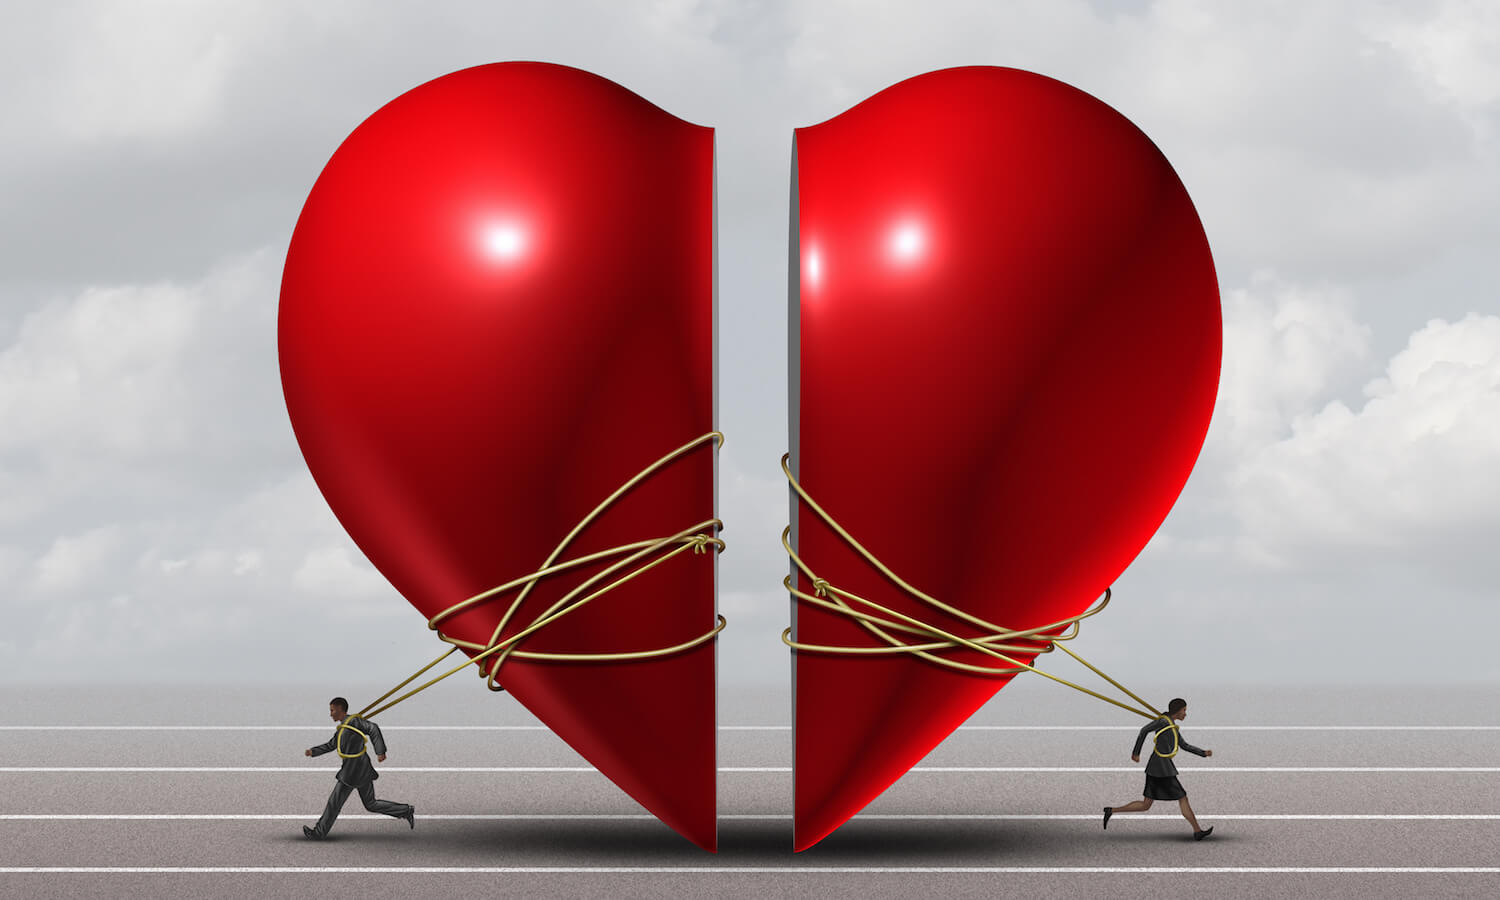 Couple in crisis and relationship problem concept as a man and woman pulling apart a red valentine heart as a divorce or separation metaphor with 3D illustration elements.